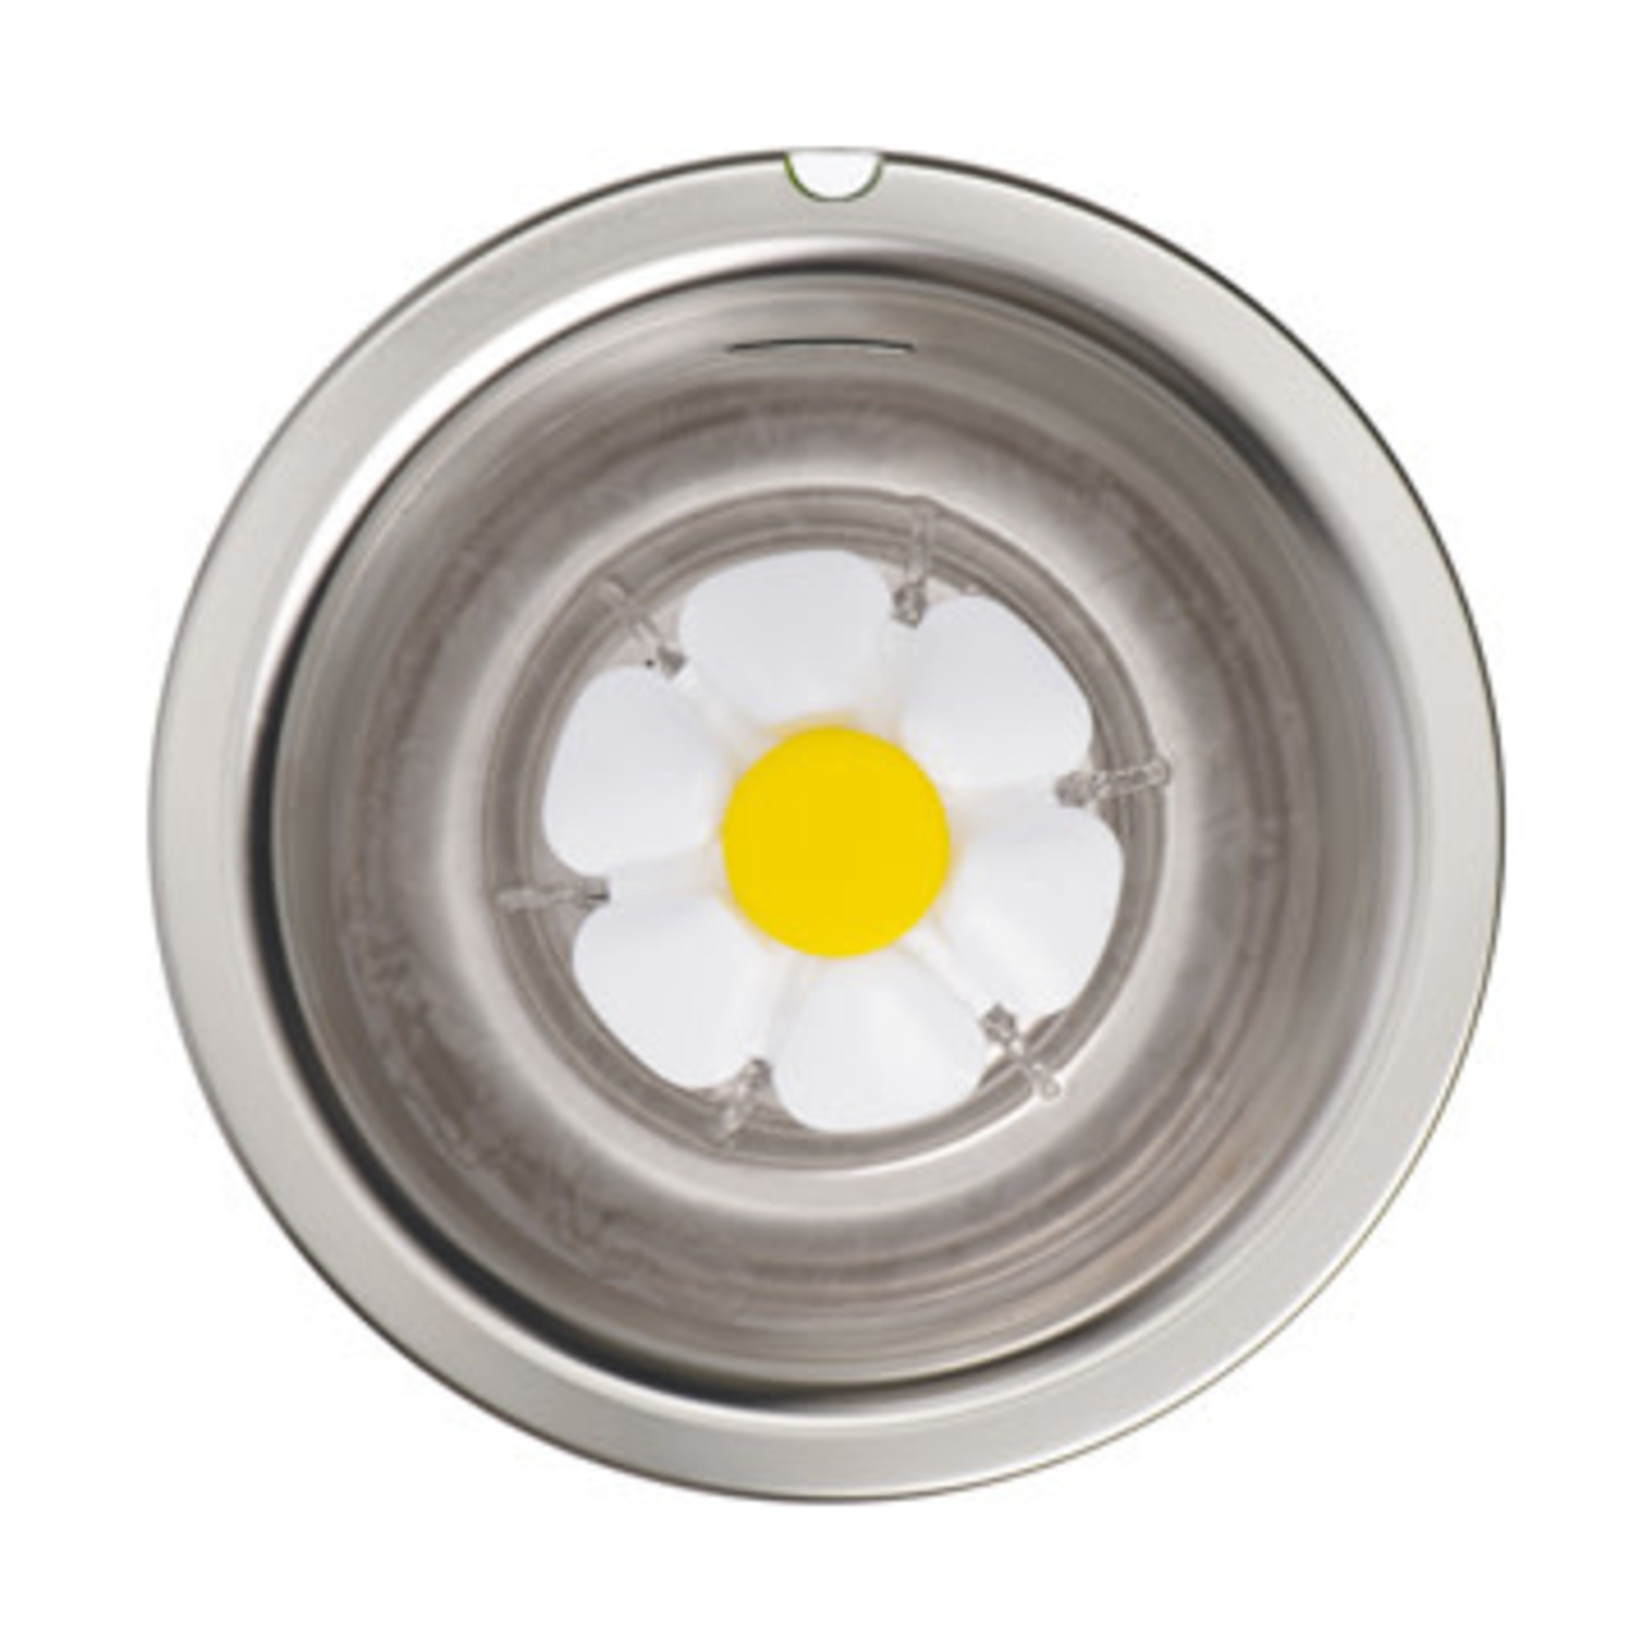 CATIT Catit Flower Fountain Stainless Steel Top